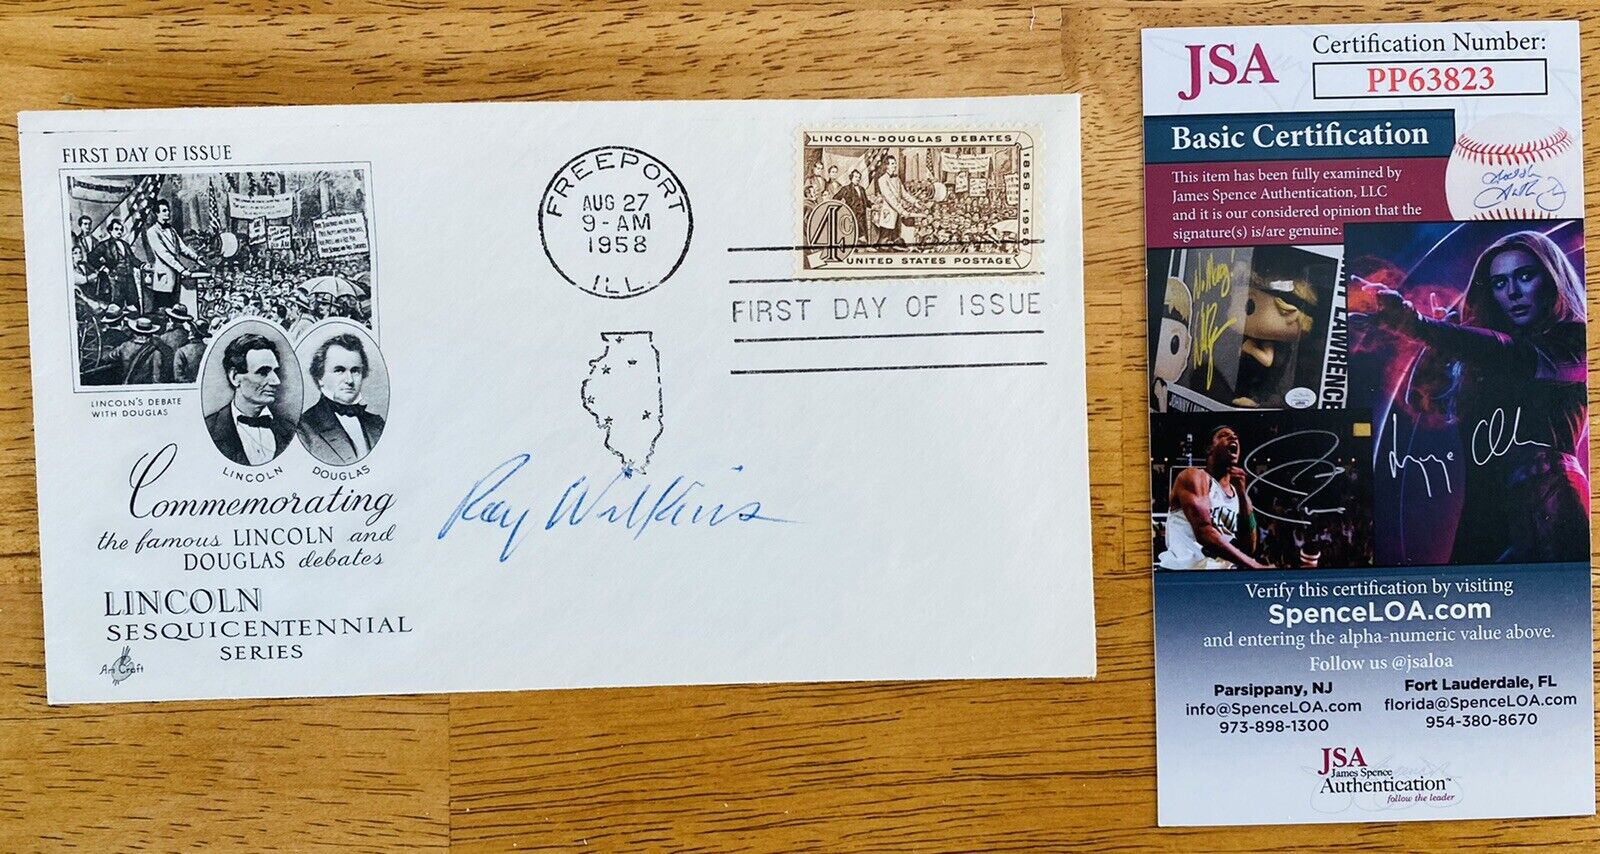 Roy Wilkins Signed Autographed First Day Cover JSA Cert Civil Rights Activist